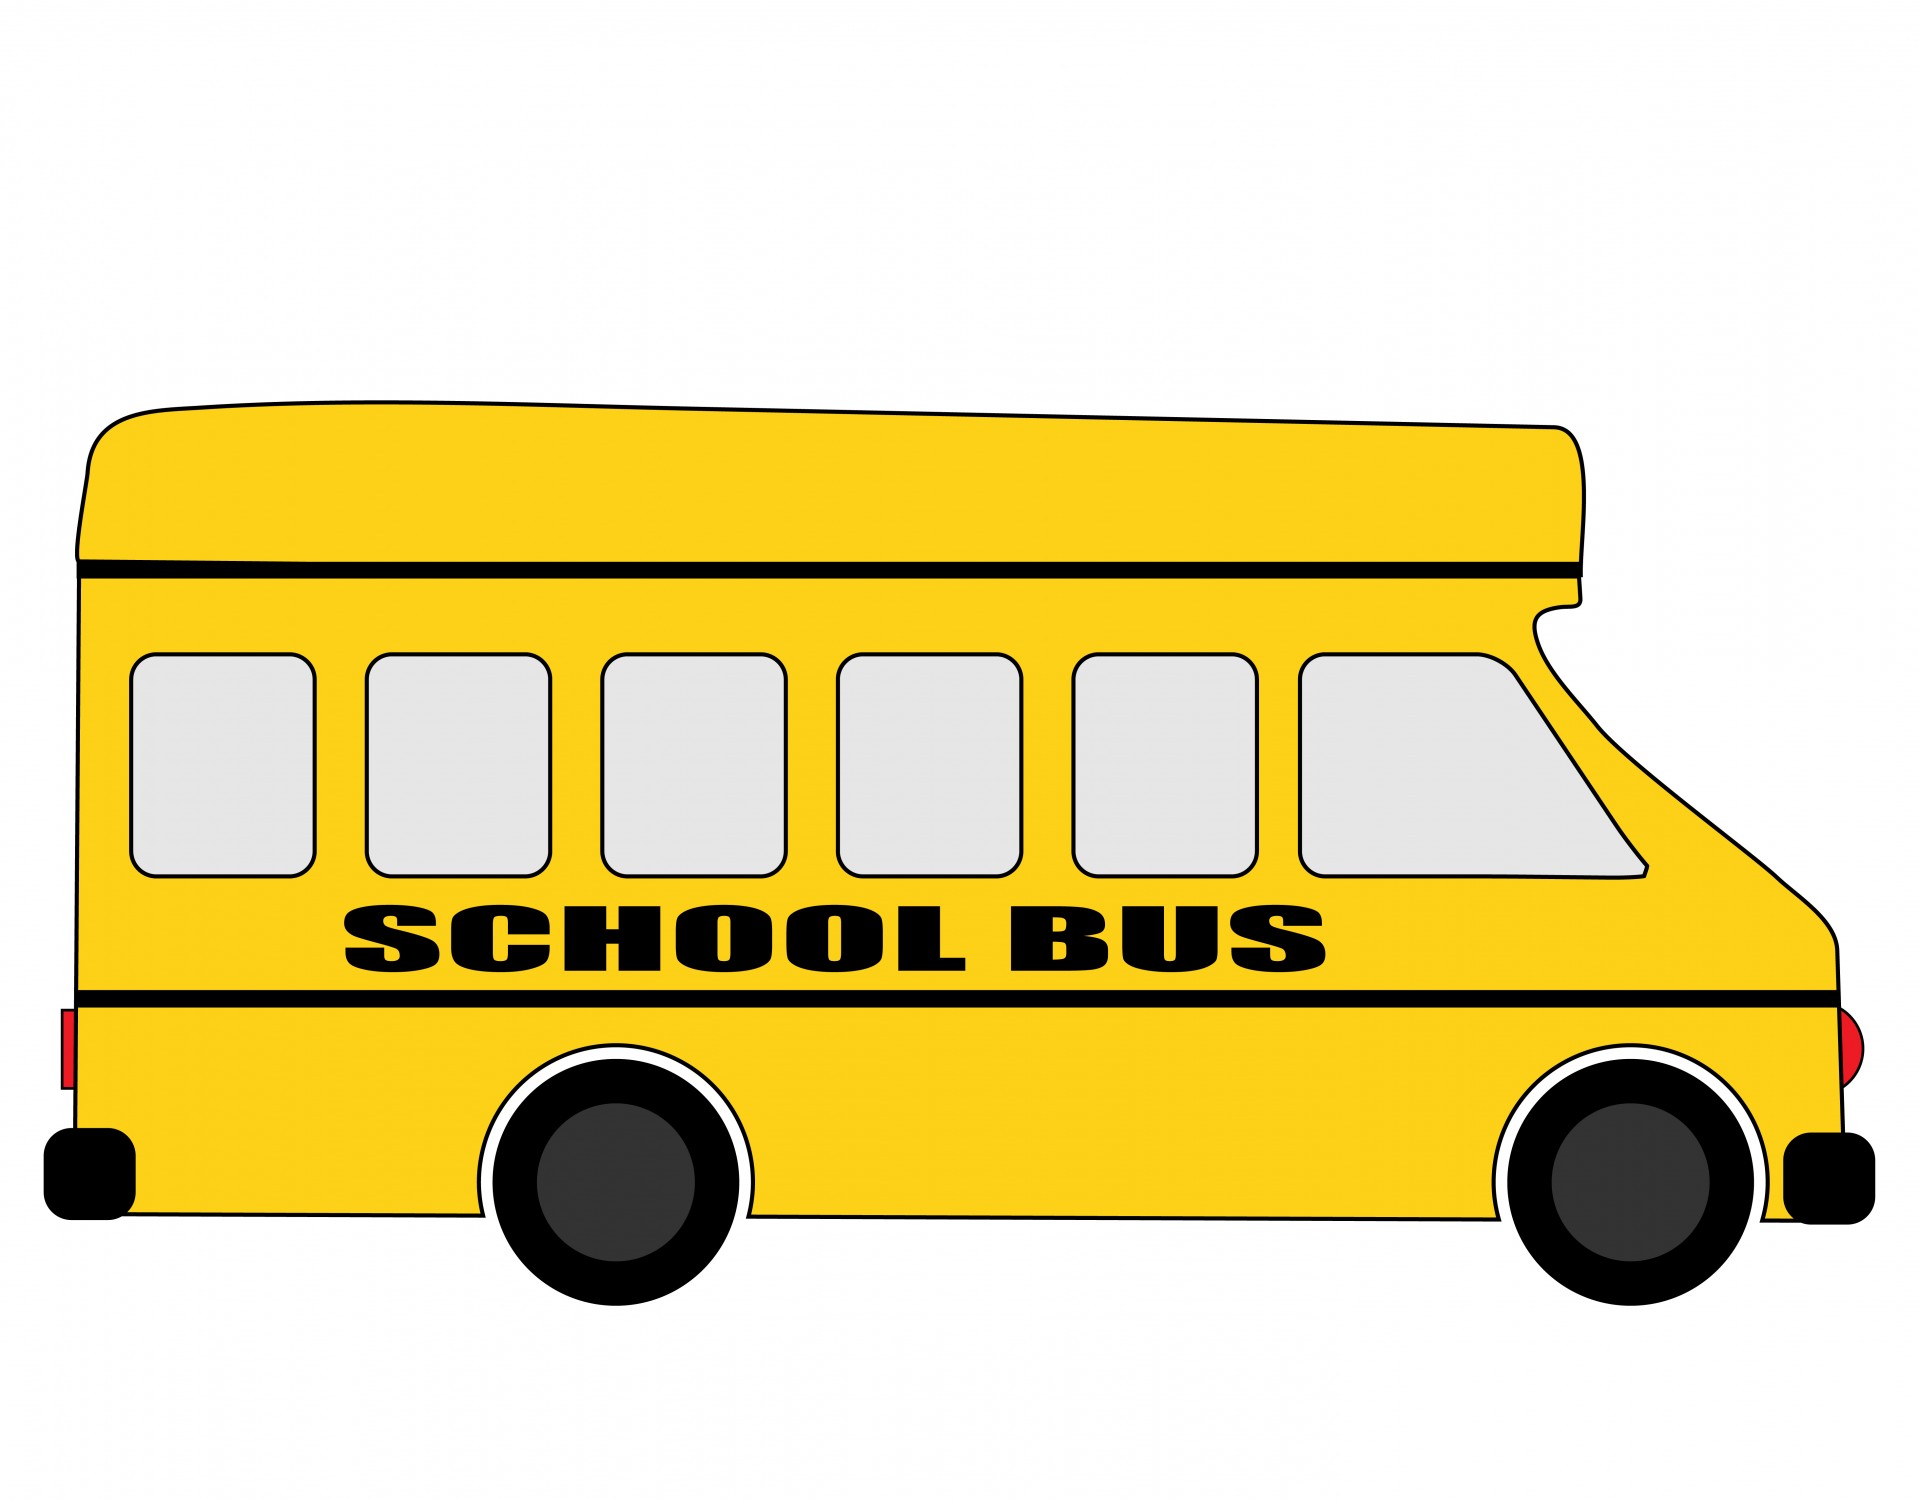 School bus black and white school bus side view clipart